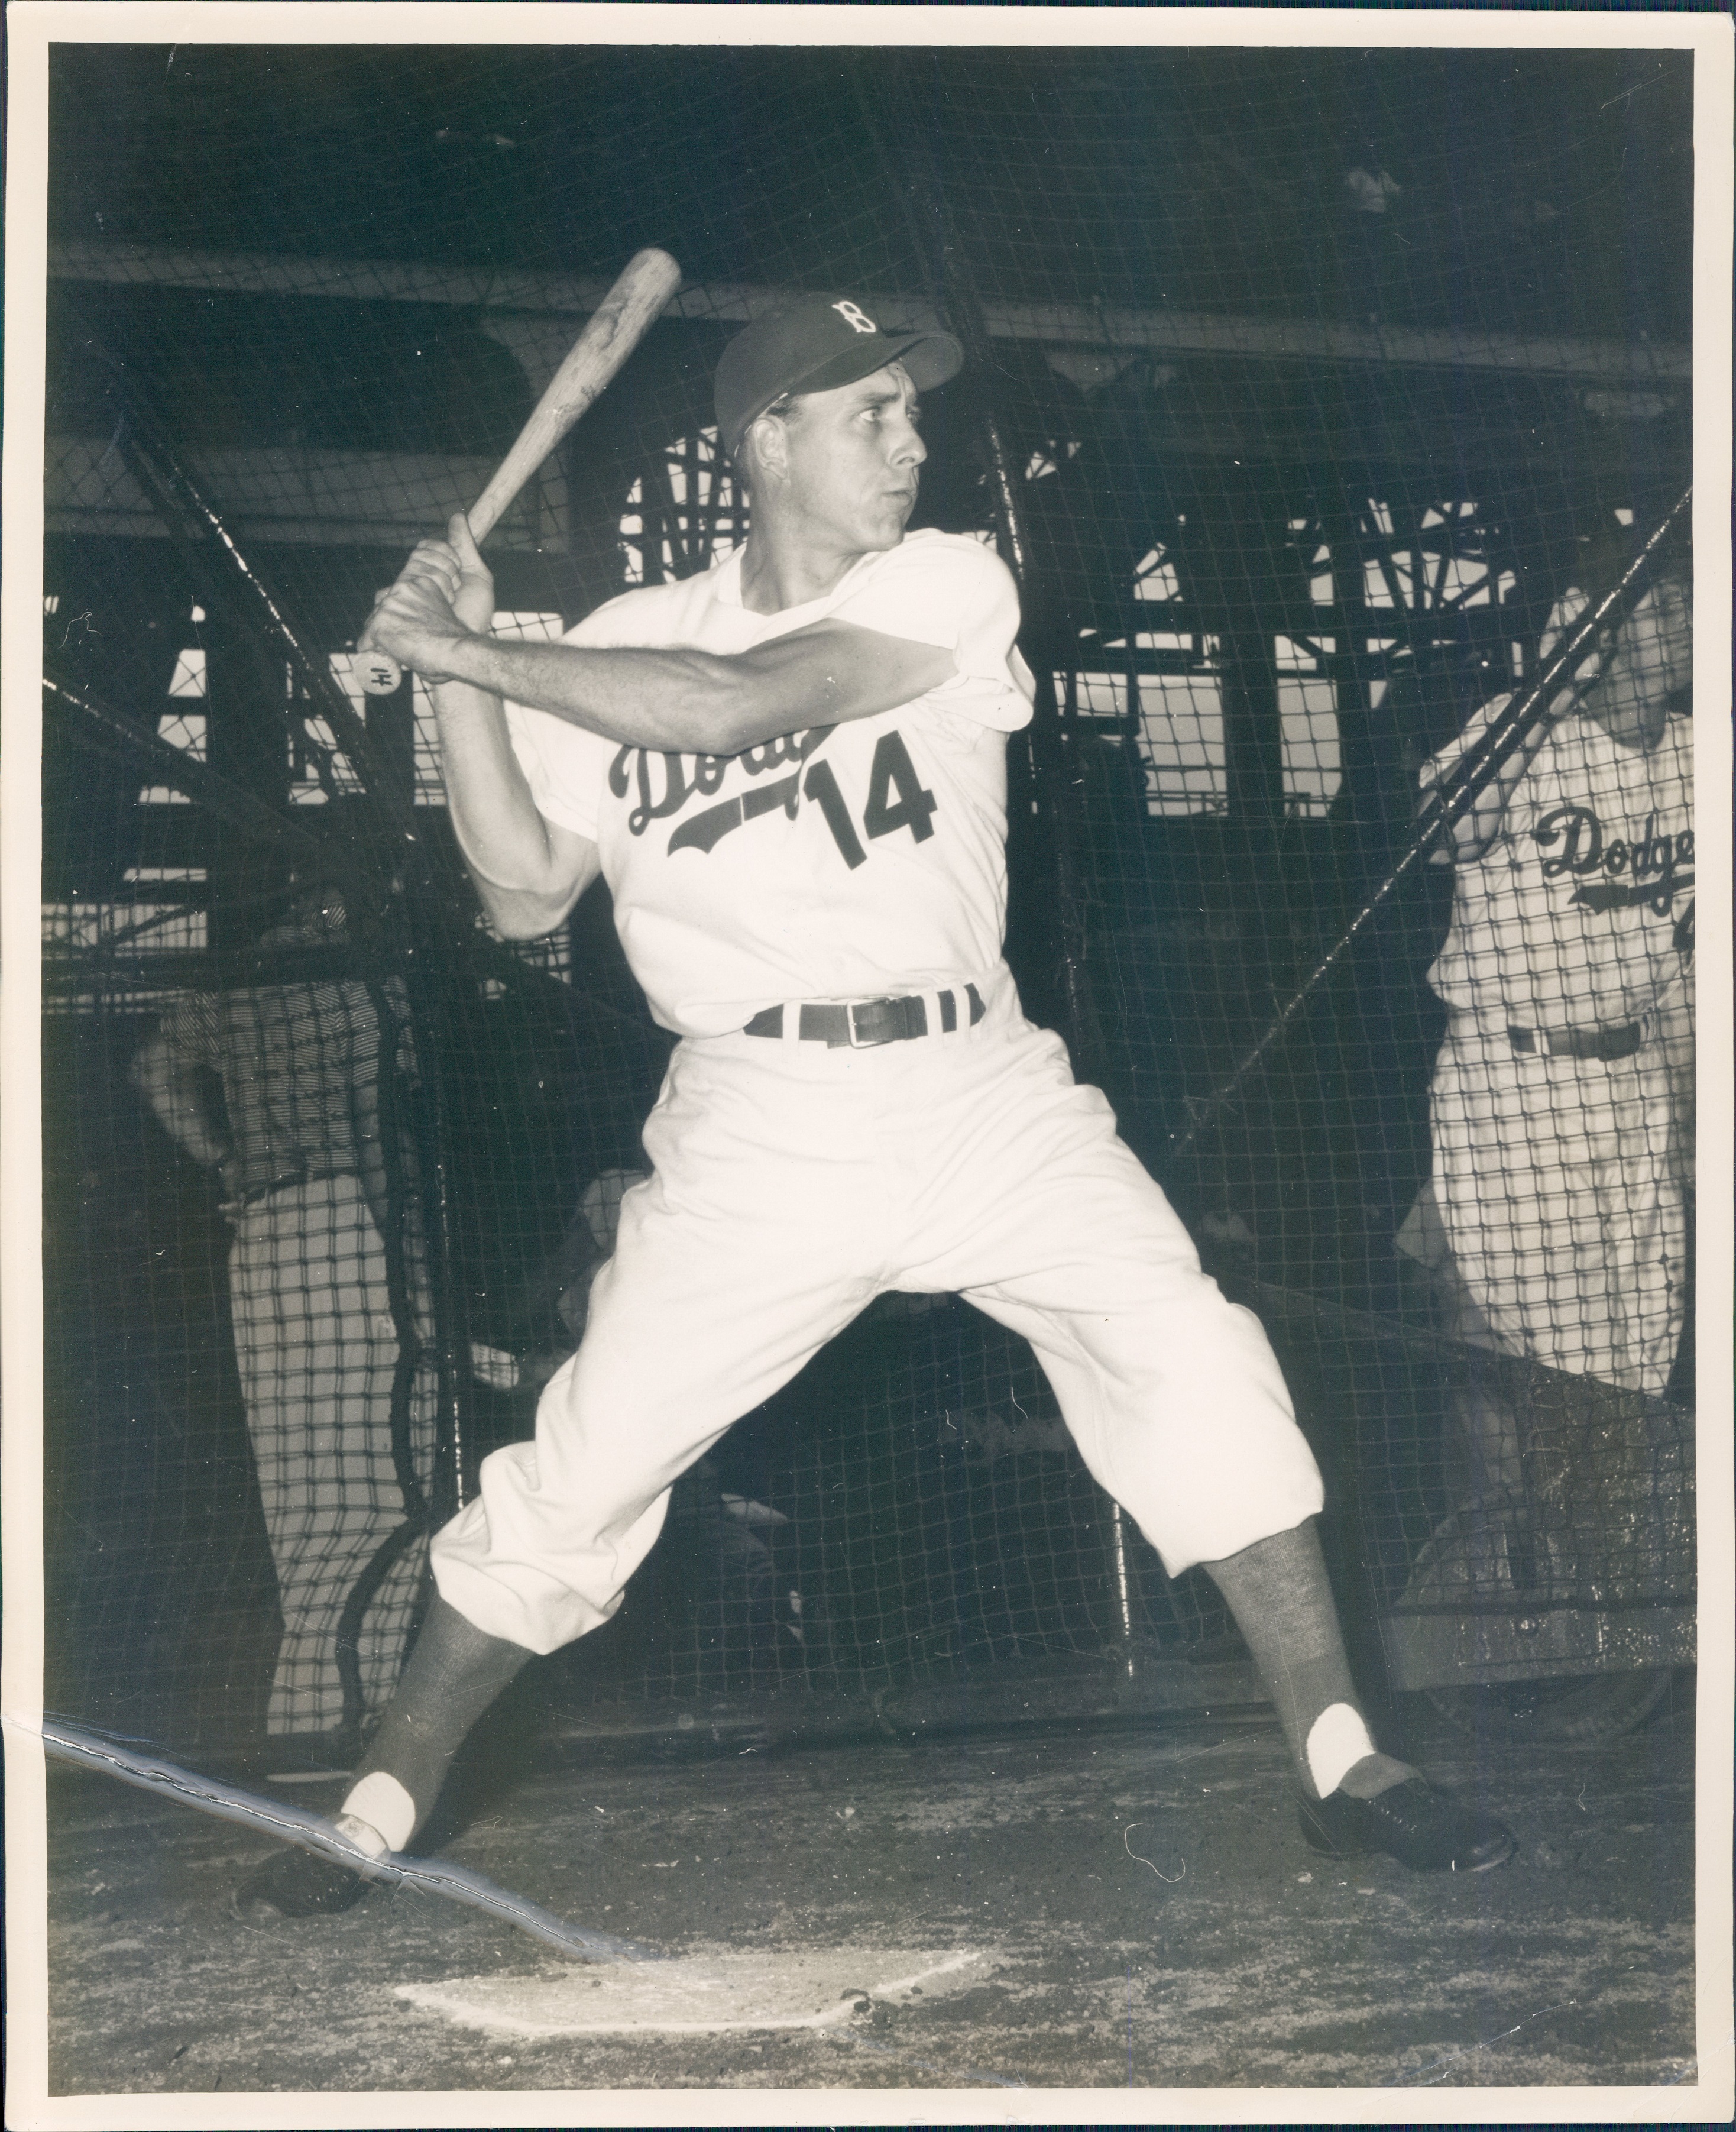 Gil Hodges hit 361 home runs for the Dodgers and drove in 100 runs in seven straight seasons (1949-55).